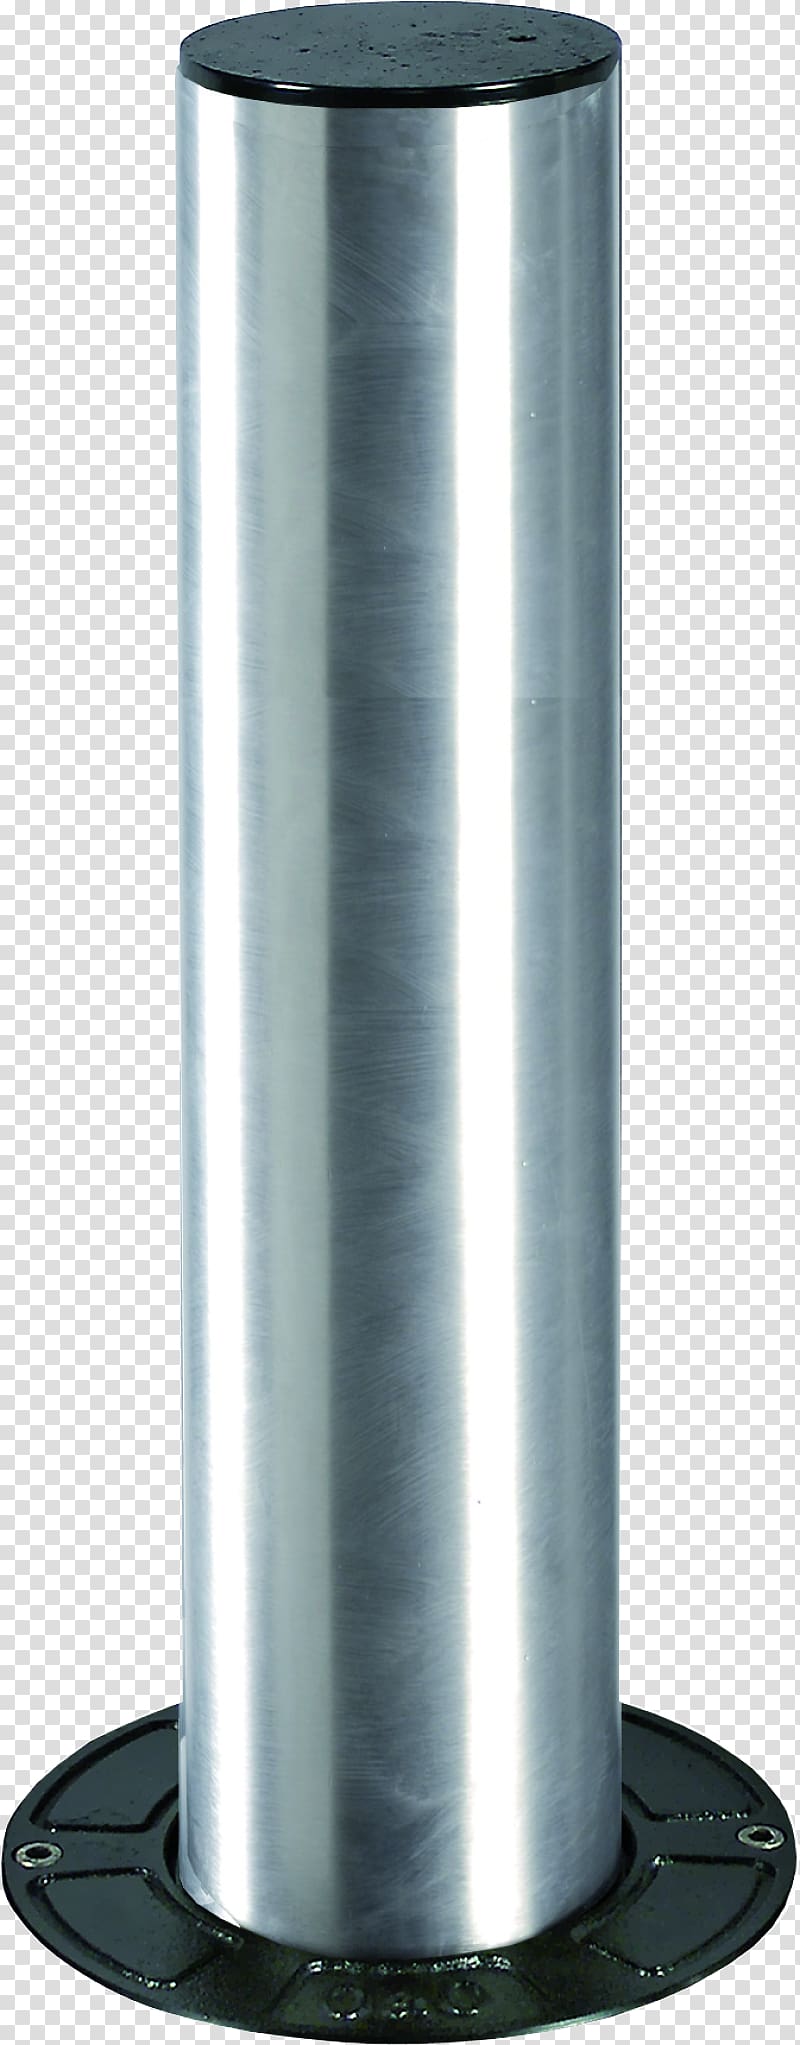 Bollard Stainless steel Computer hardware Product Manuals, Scudo transparent background PNG clipart